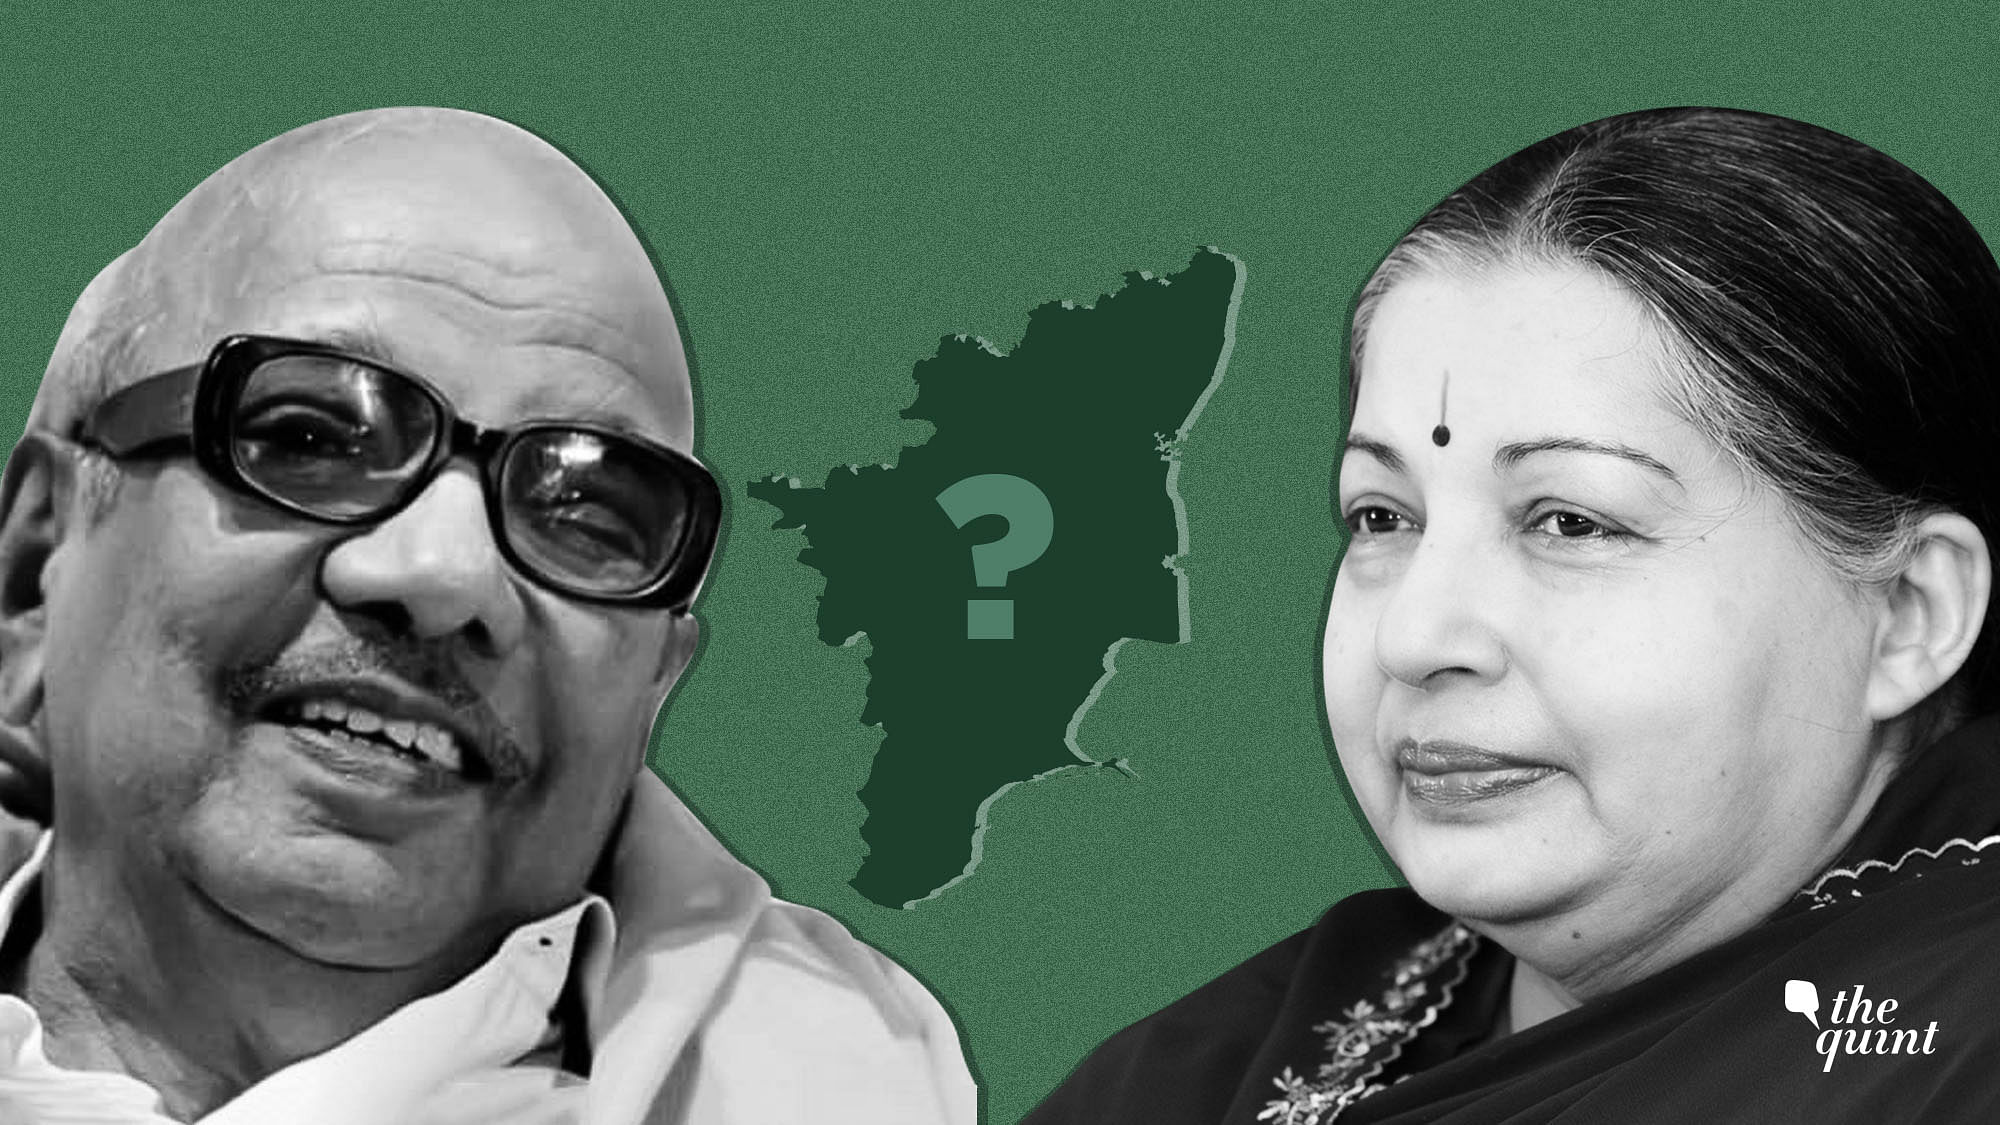 Both the DMK &amp; AIADMK have lost their icons, but who’s at a greater disadvantage in Tamil Nadu?